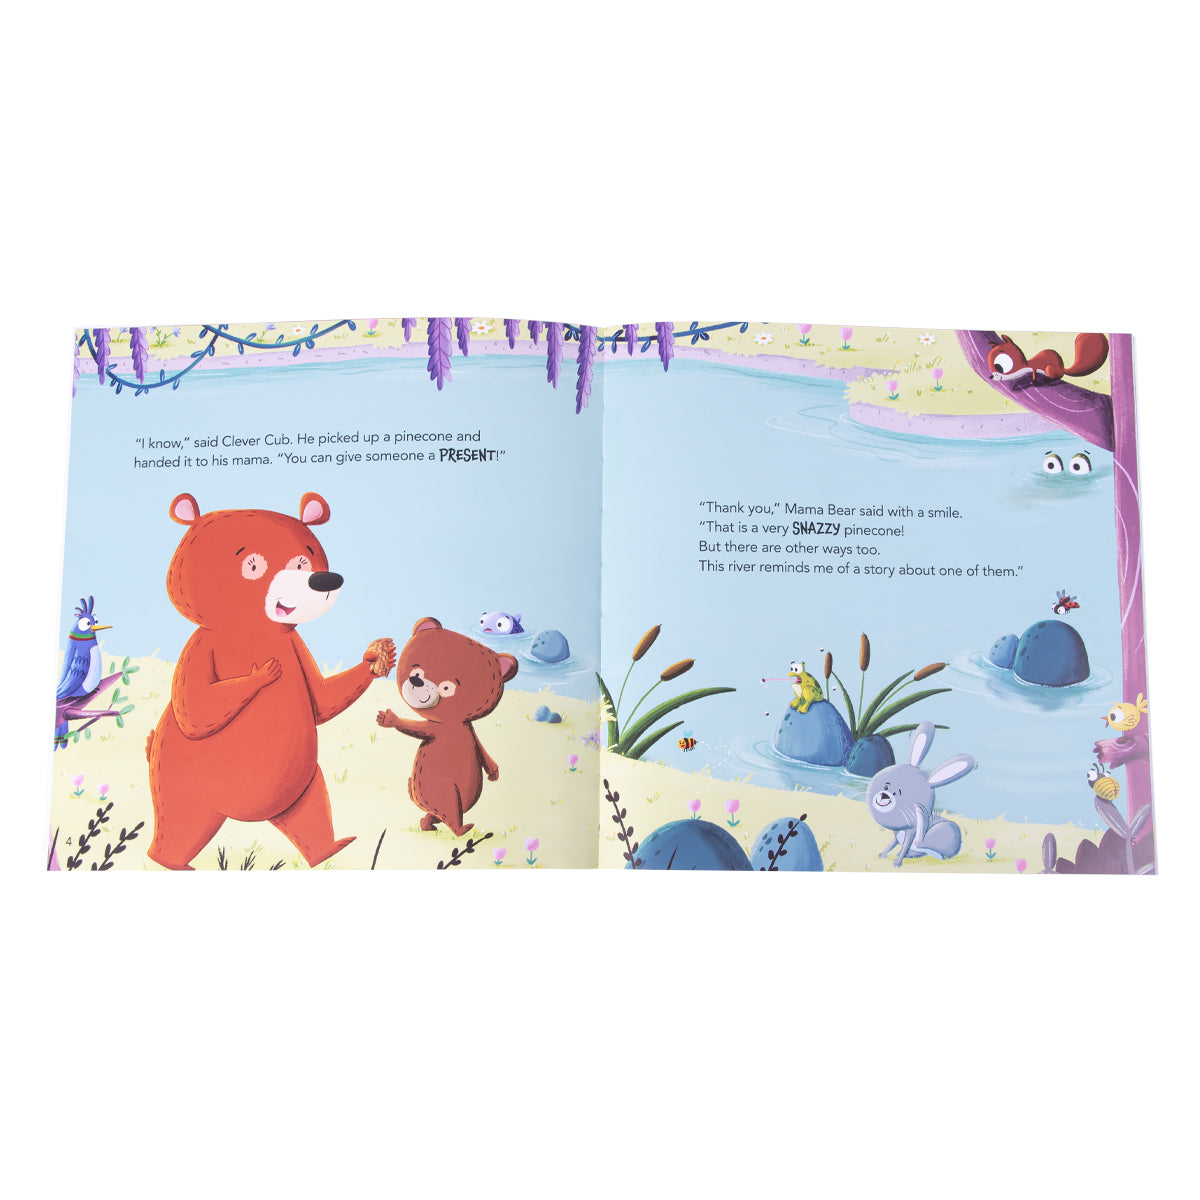 Clever Cub Learns About Love (Paperback)